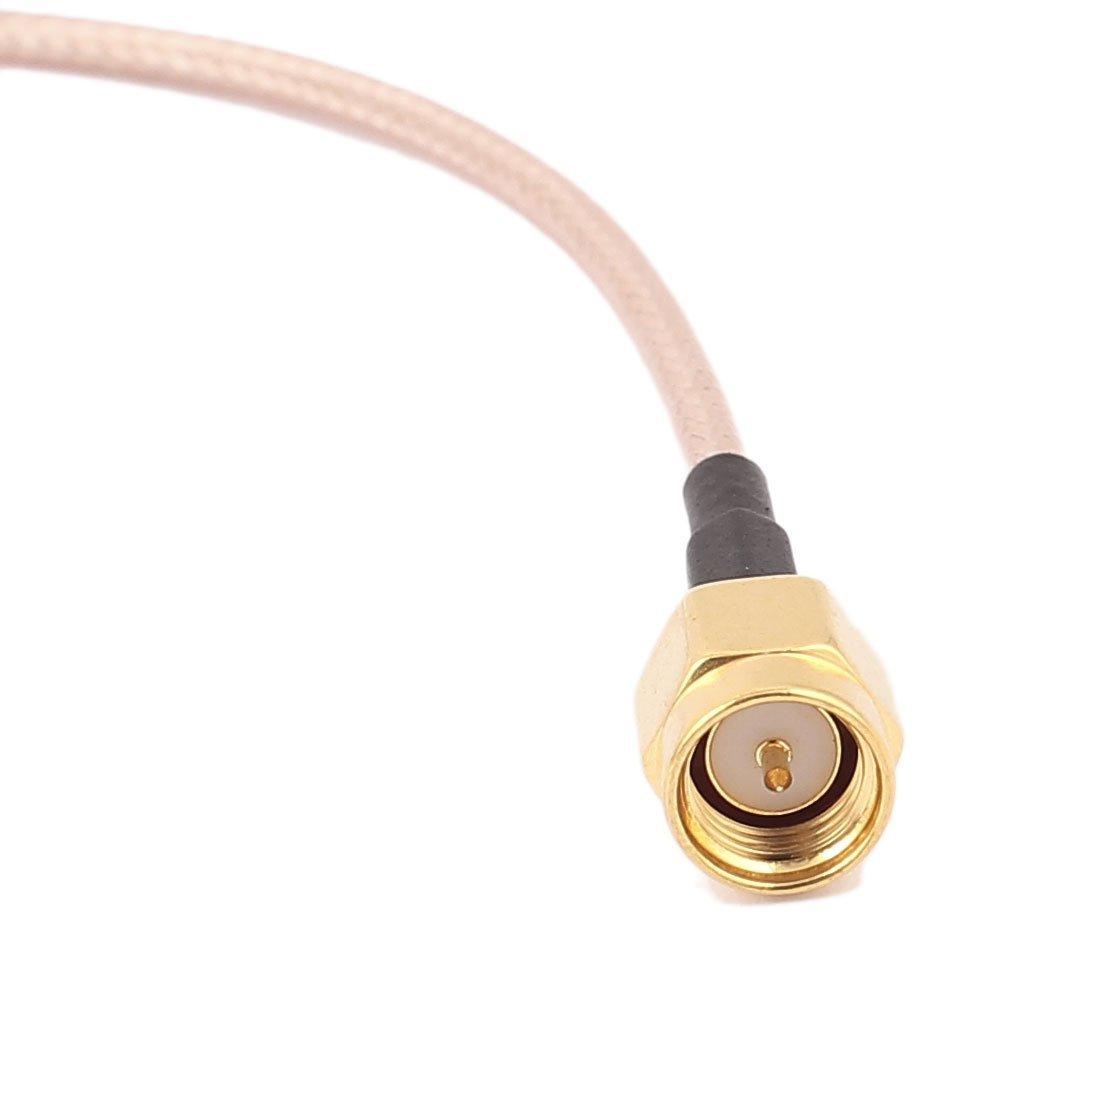 RP-BNC-J Female to SMA-J Male RG316 Coaxial Cable Pigtail 1metre